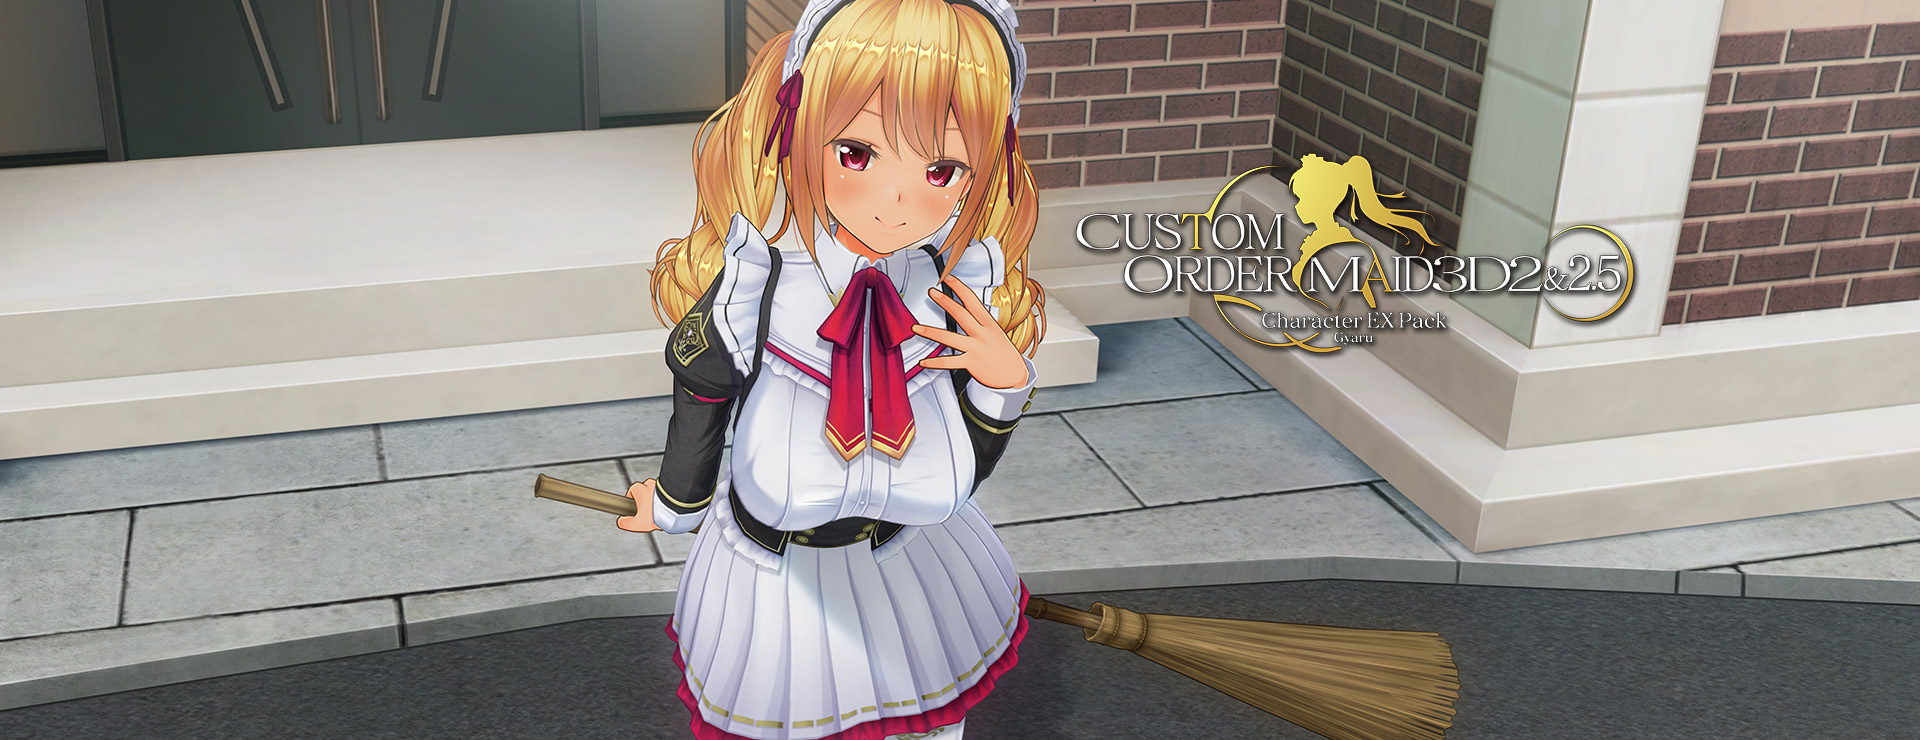 Custom Order Maid 3D 2: Character EX Pack Gyaru High Poly All In One Edition - Simulación Juego